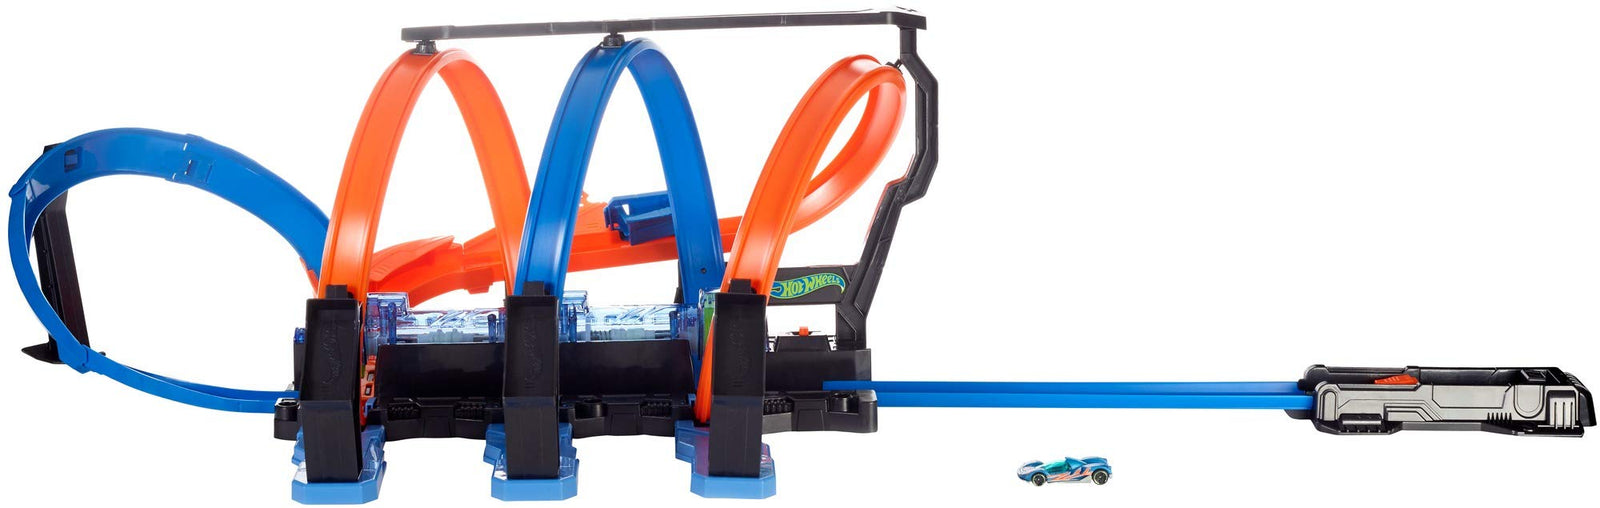 Hot Wheels Corkscrew Crash Track with Motorized Boosters [Amazon Exclusive]